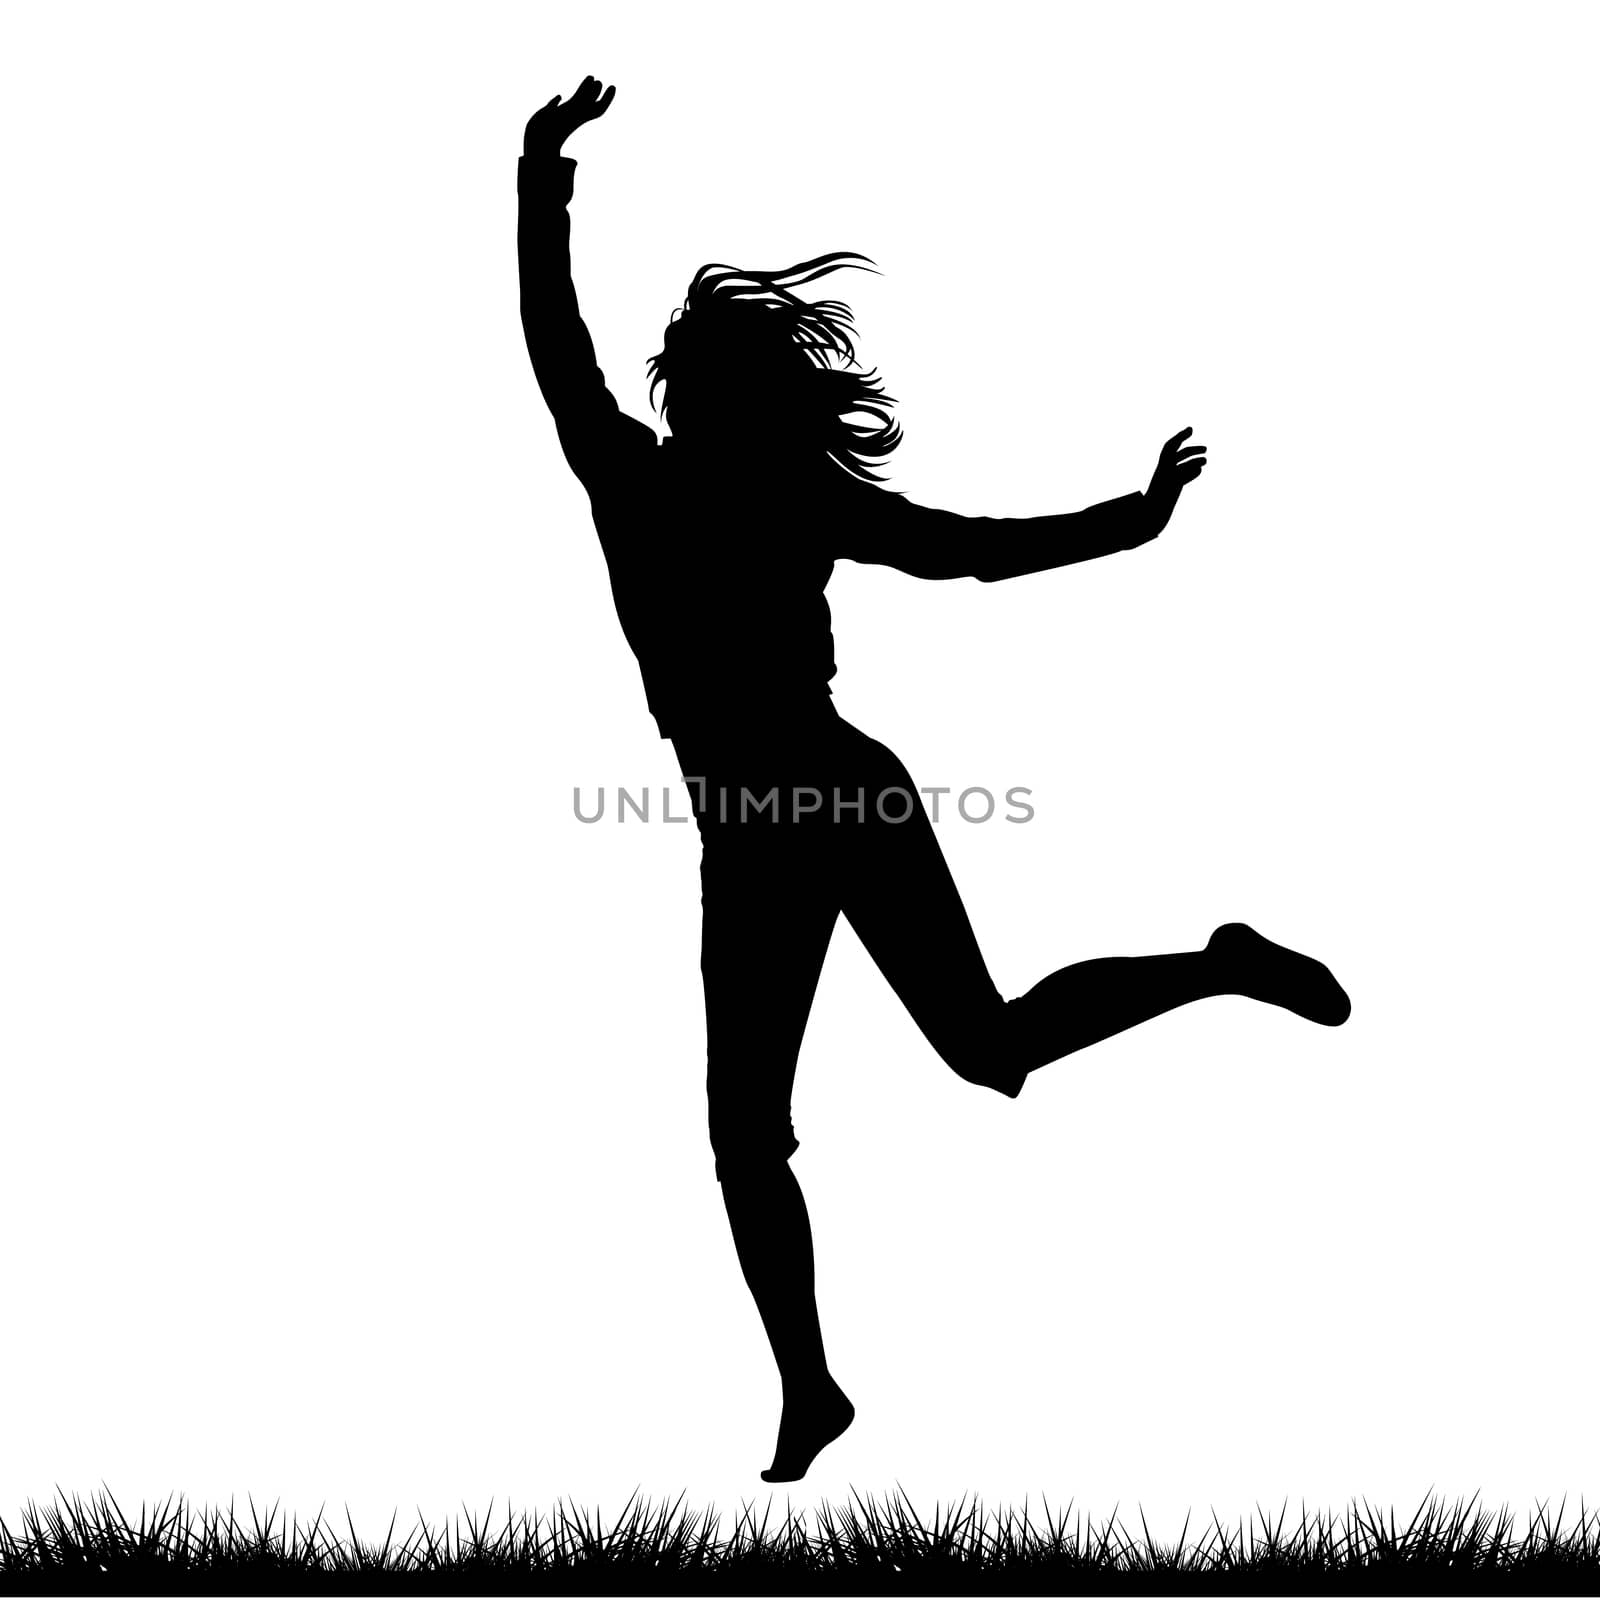 Silhouette of woman jumping outdoor by hibrida13